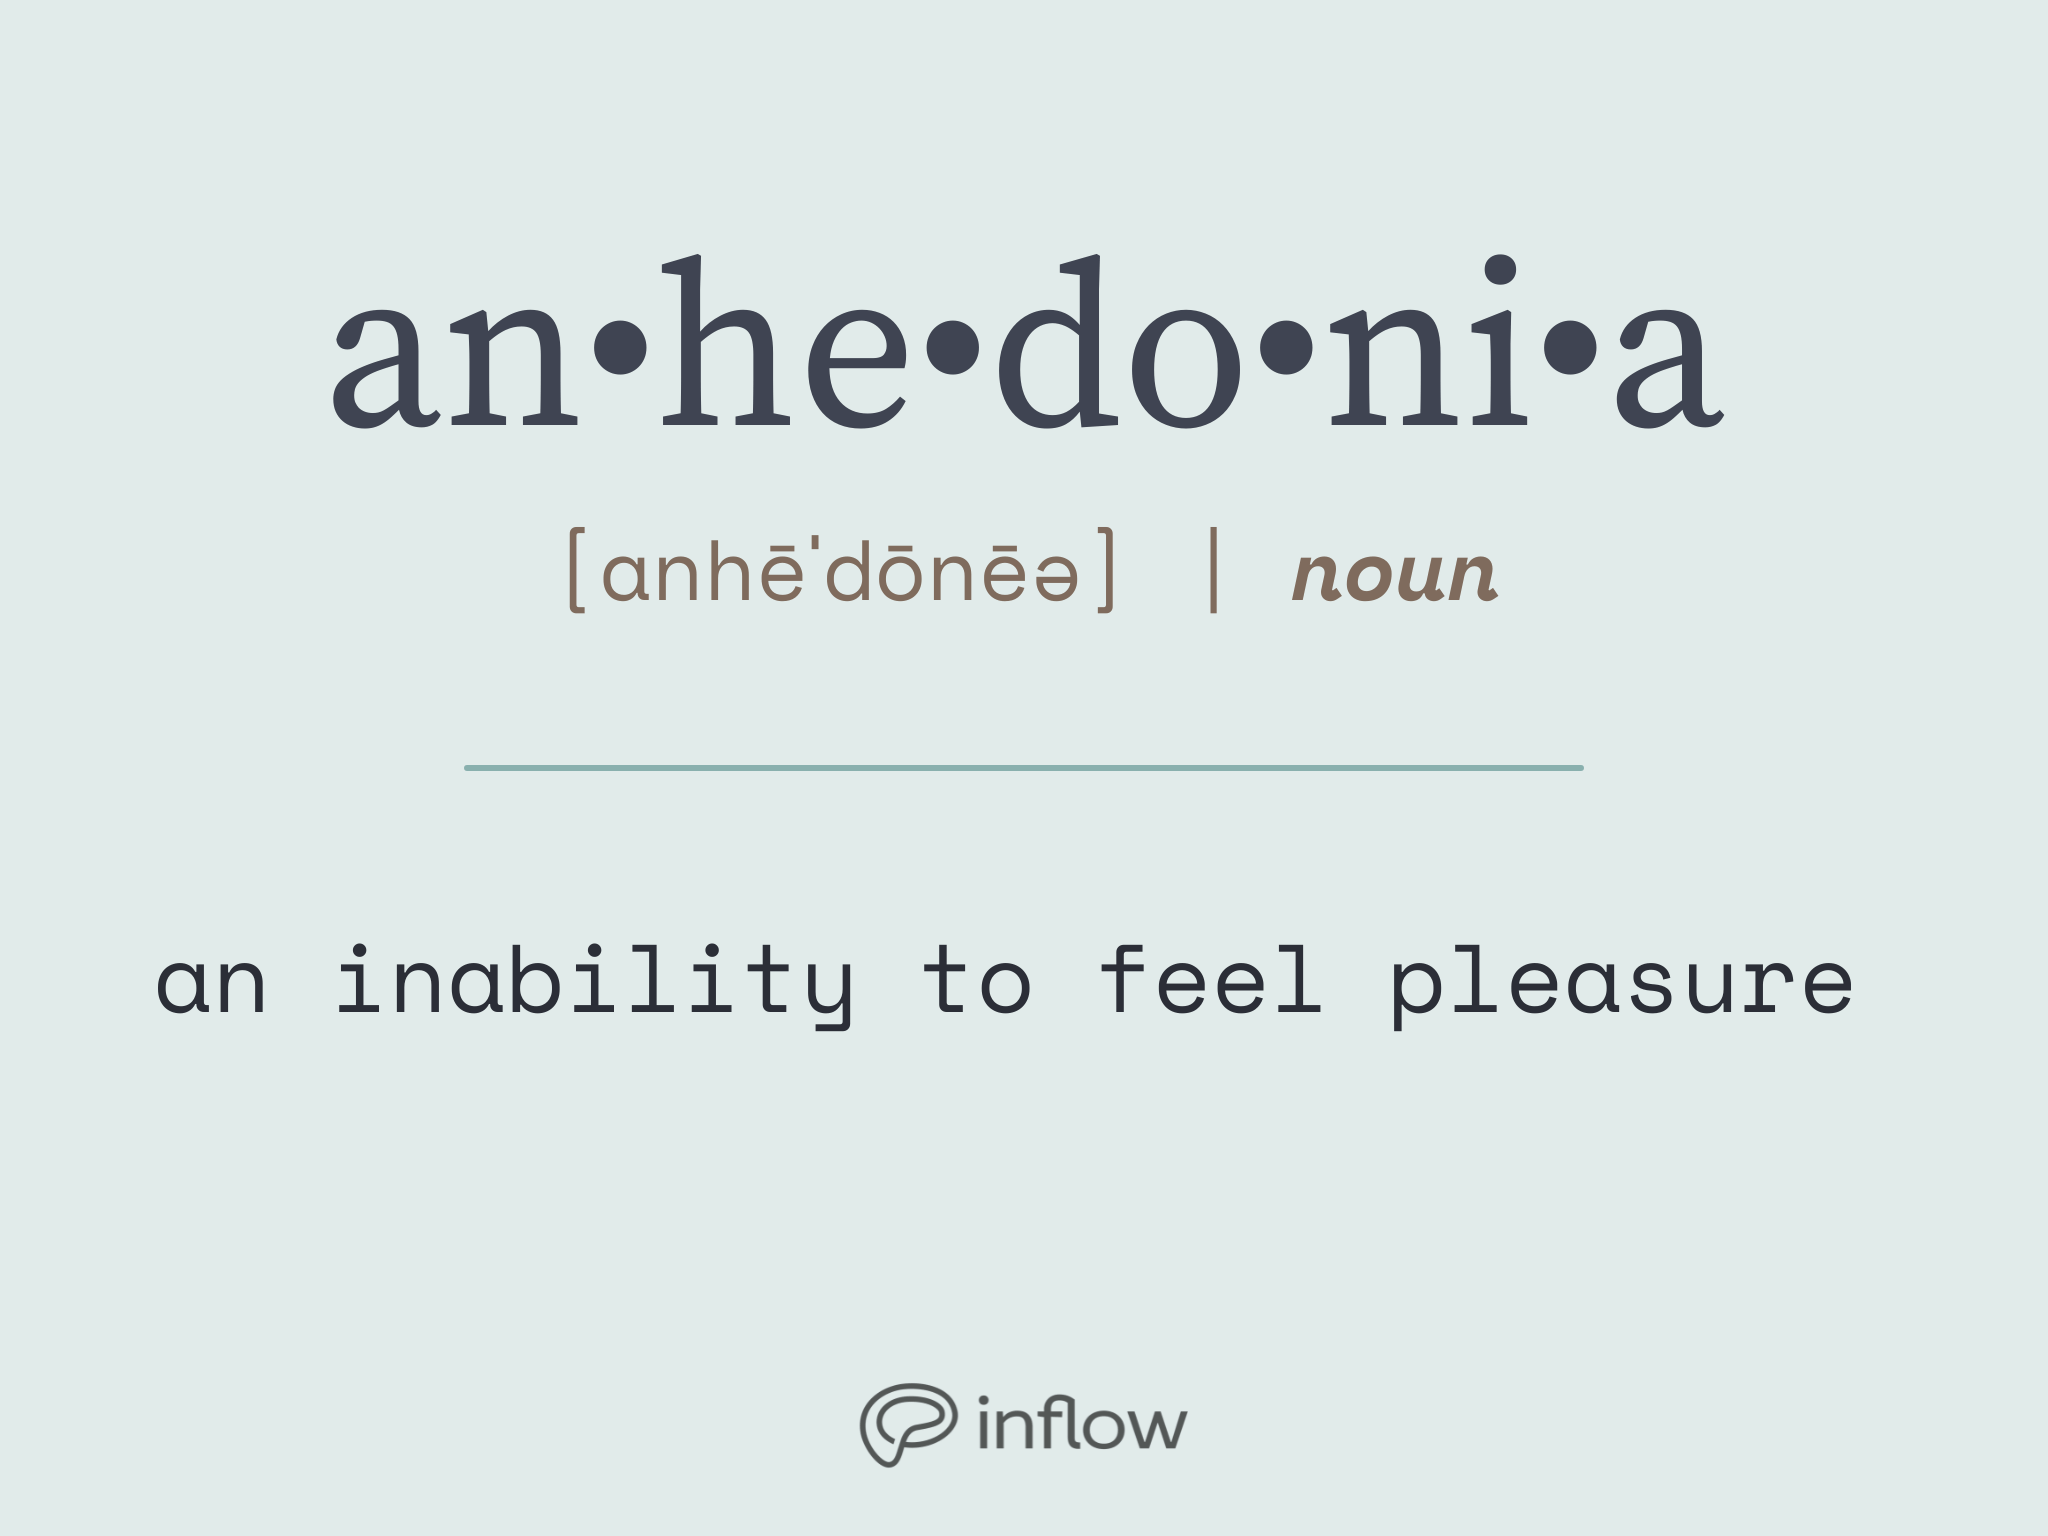 Anhedonia: What It Is, Causes, Symptoms & Treatment